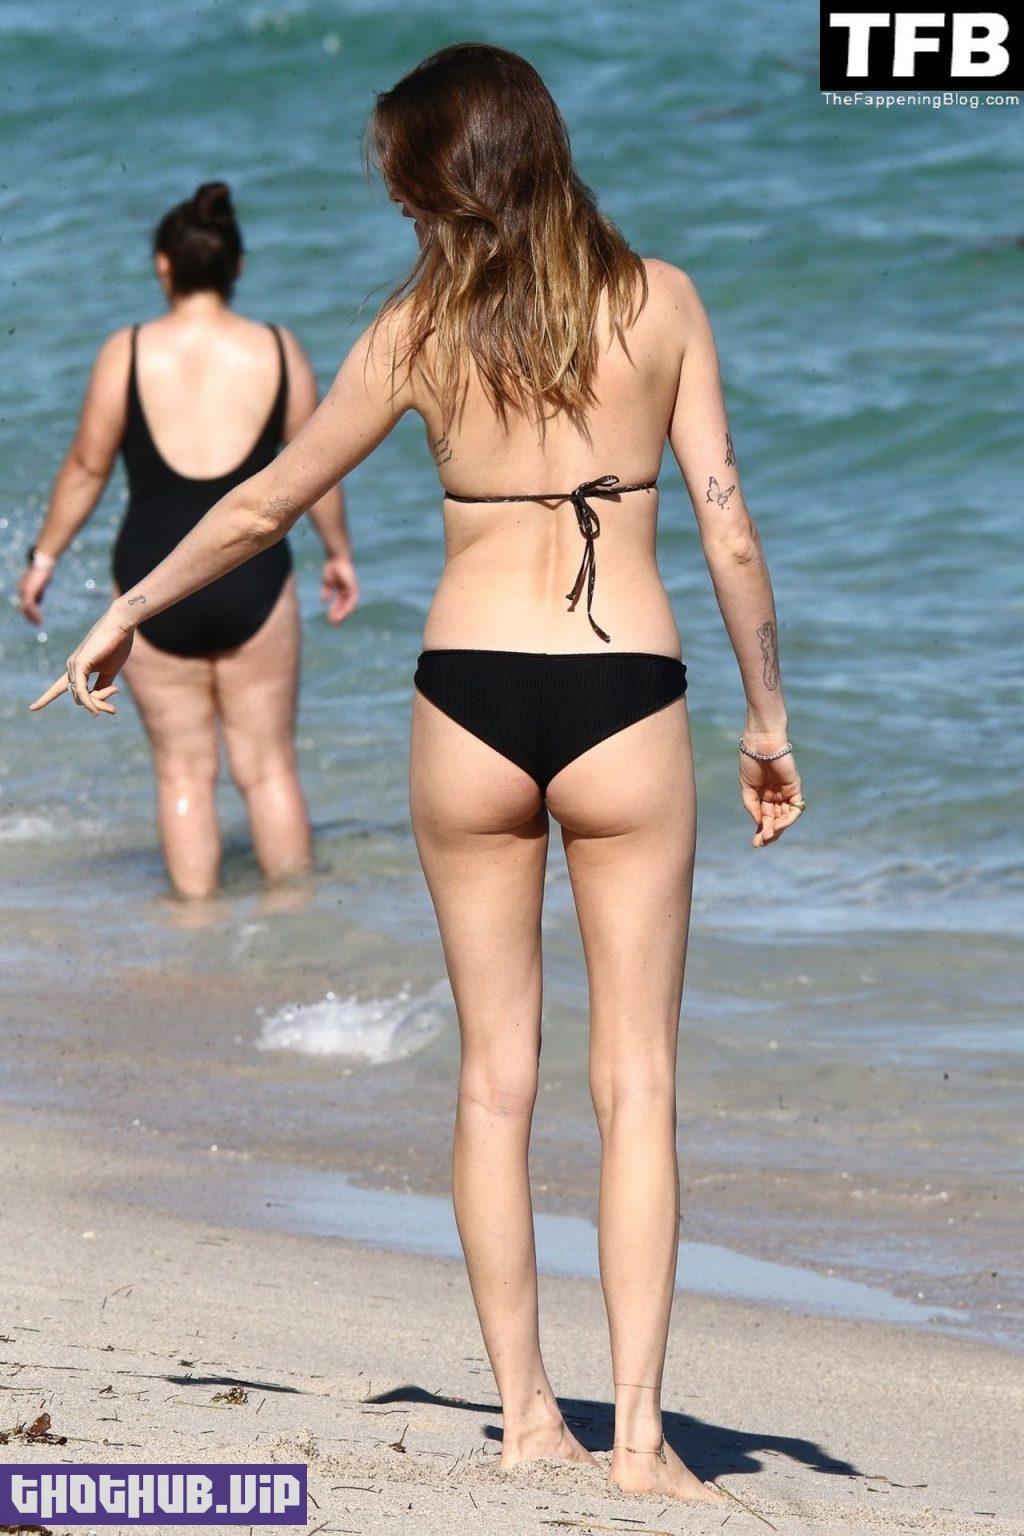 Behati Prinsloo Sexy The Fappening Blog 16